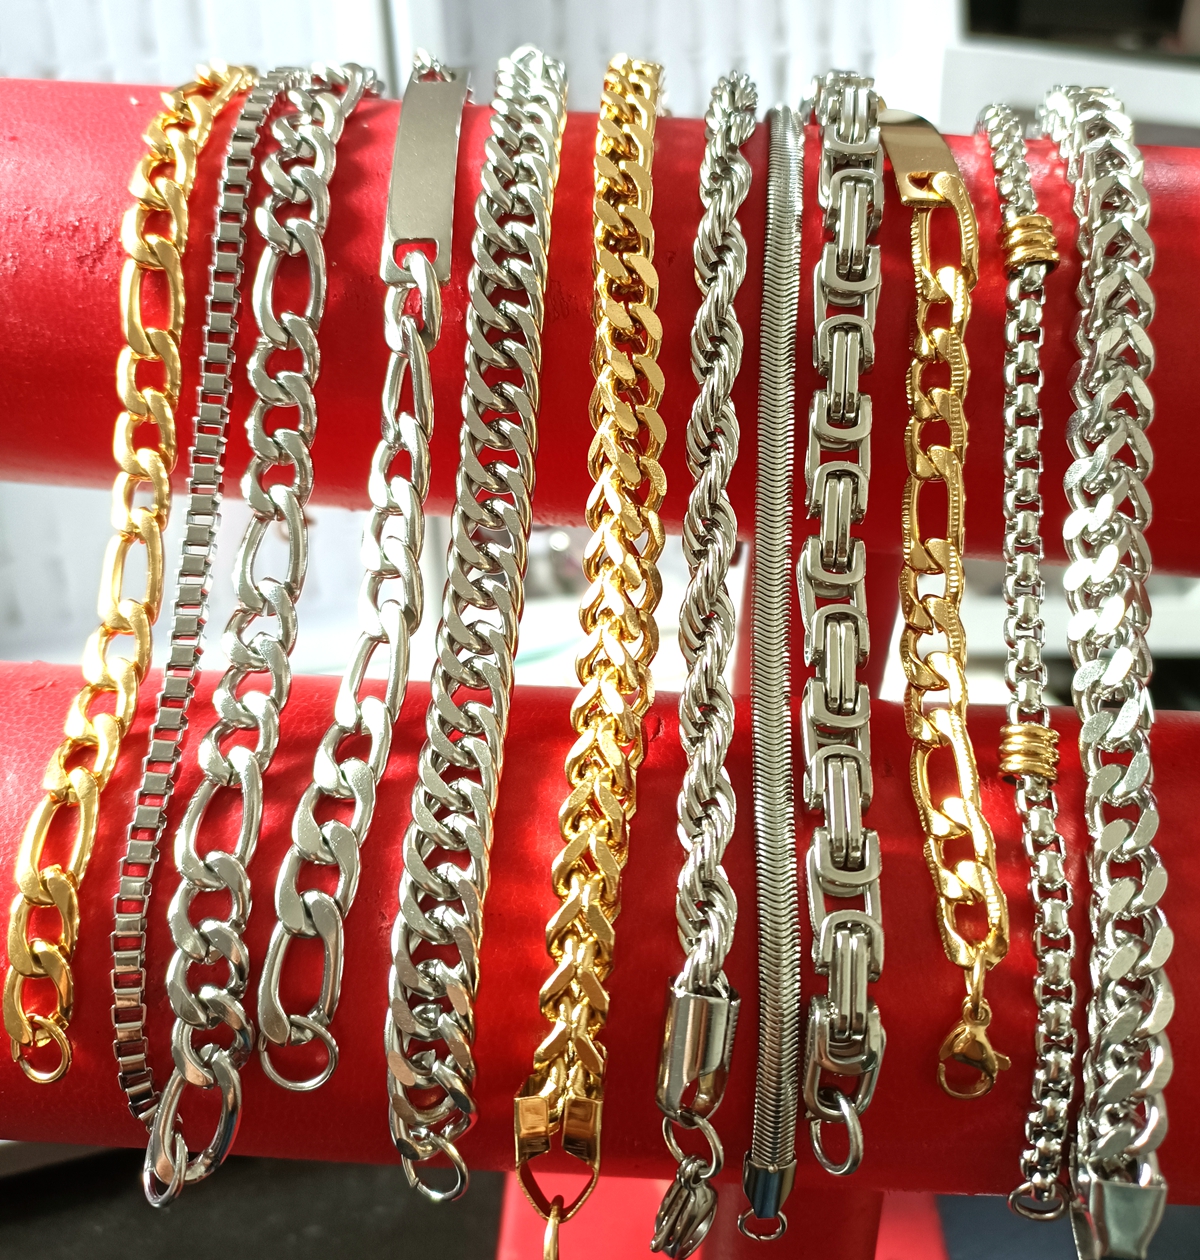 10pcs/lot Top Mix chain link Stainless Steel Bracelet Man Punk Wristbands Cuff Bangle Wholesale Party Jewelry Favor silver gold от DHgate WW